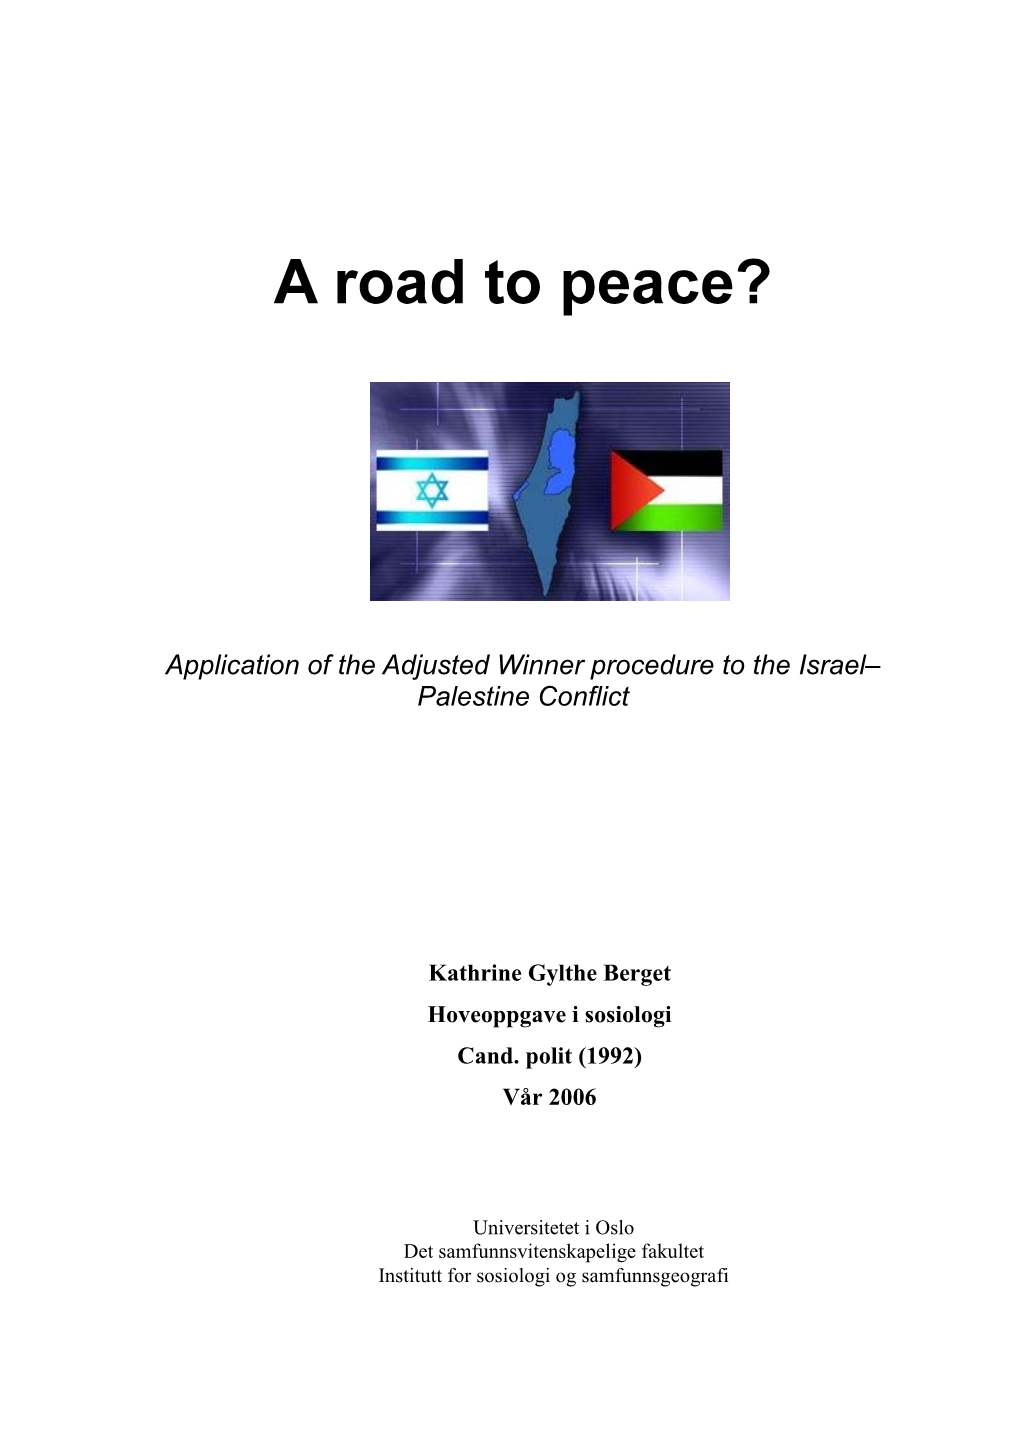 Application of the Adjusted Winner Procedure to the Israel– Palestine Conflict